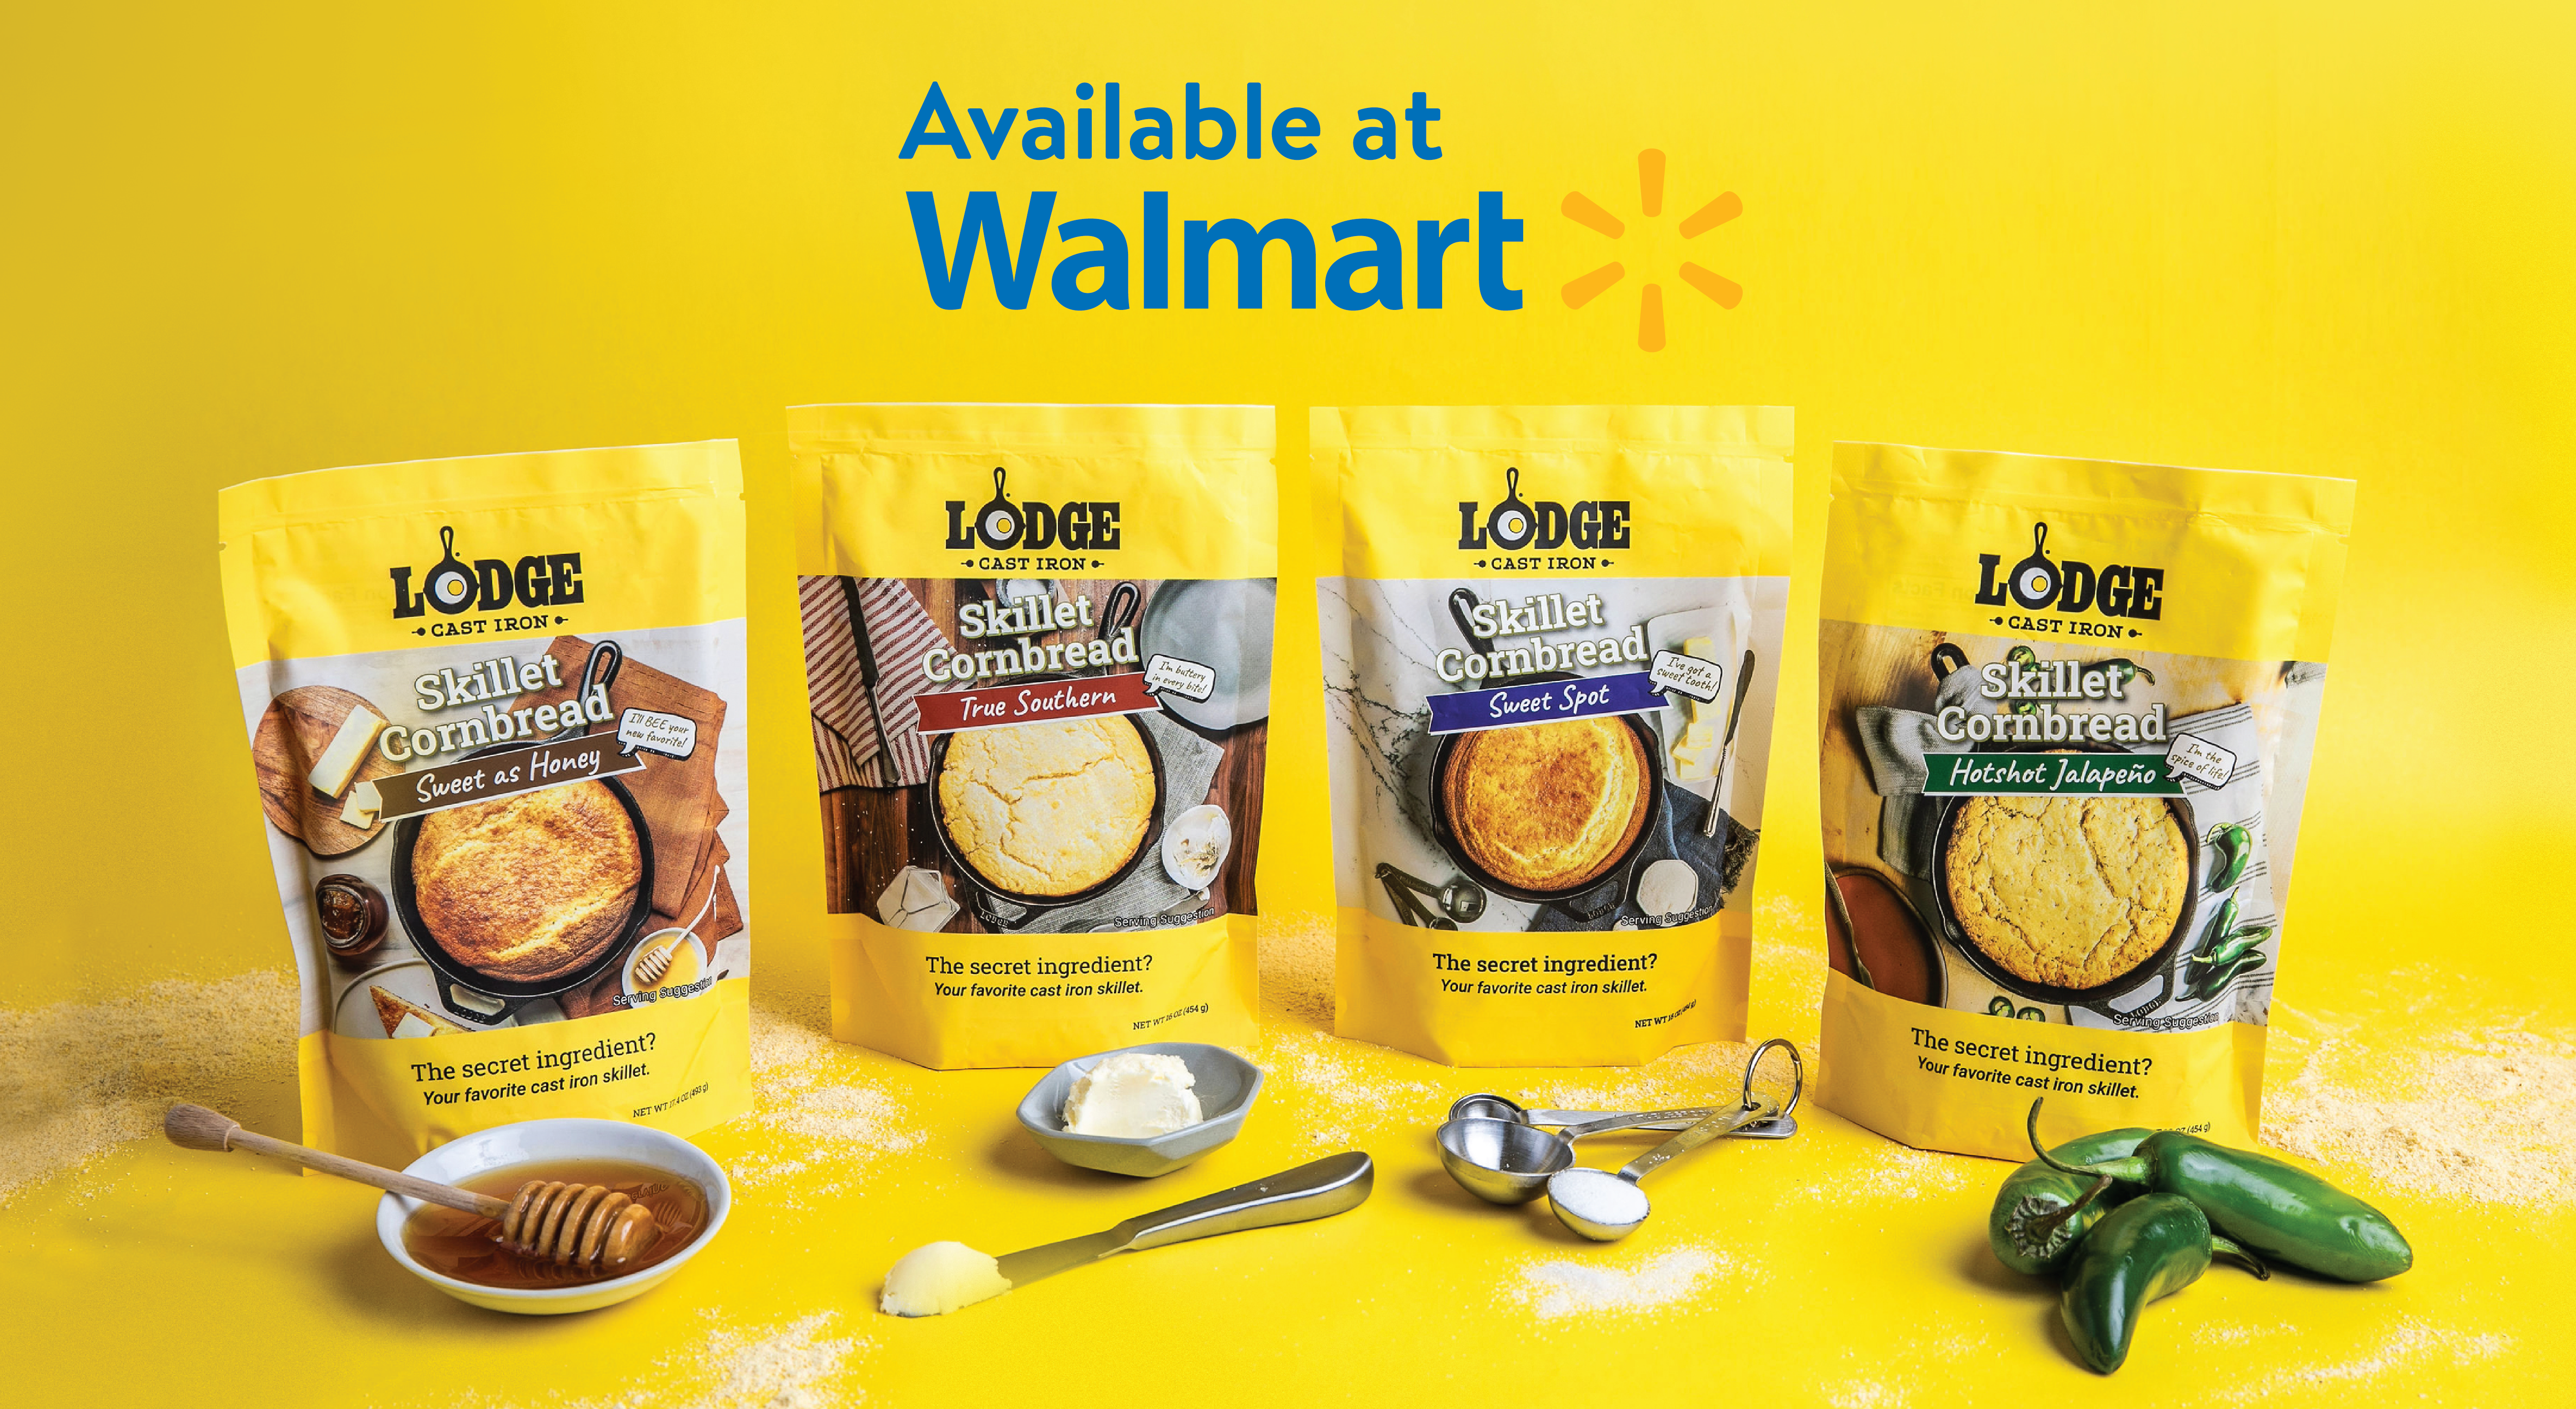 cornbread mix now available at Walmart